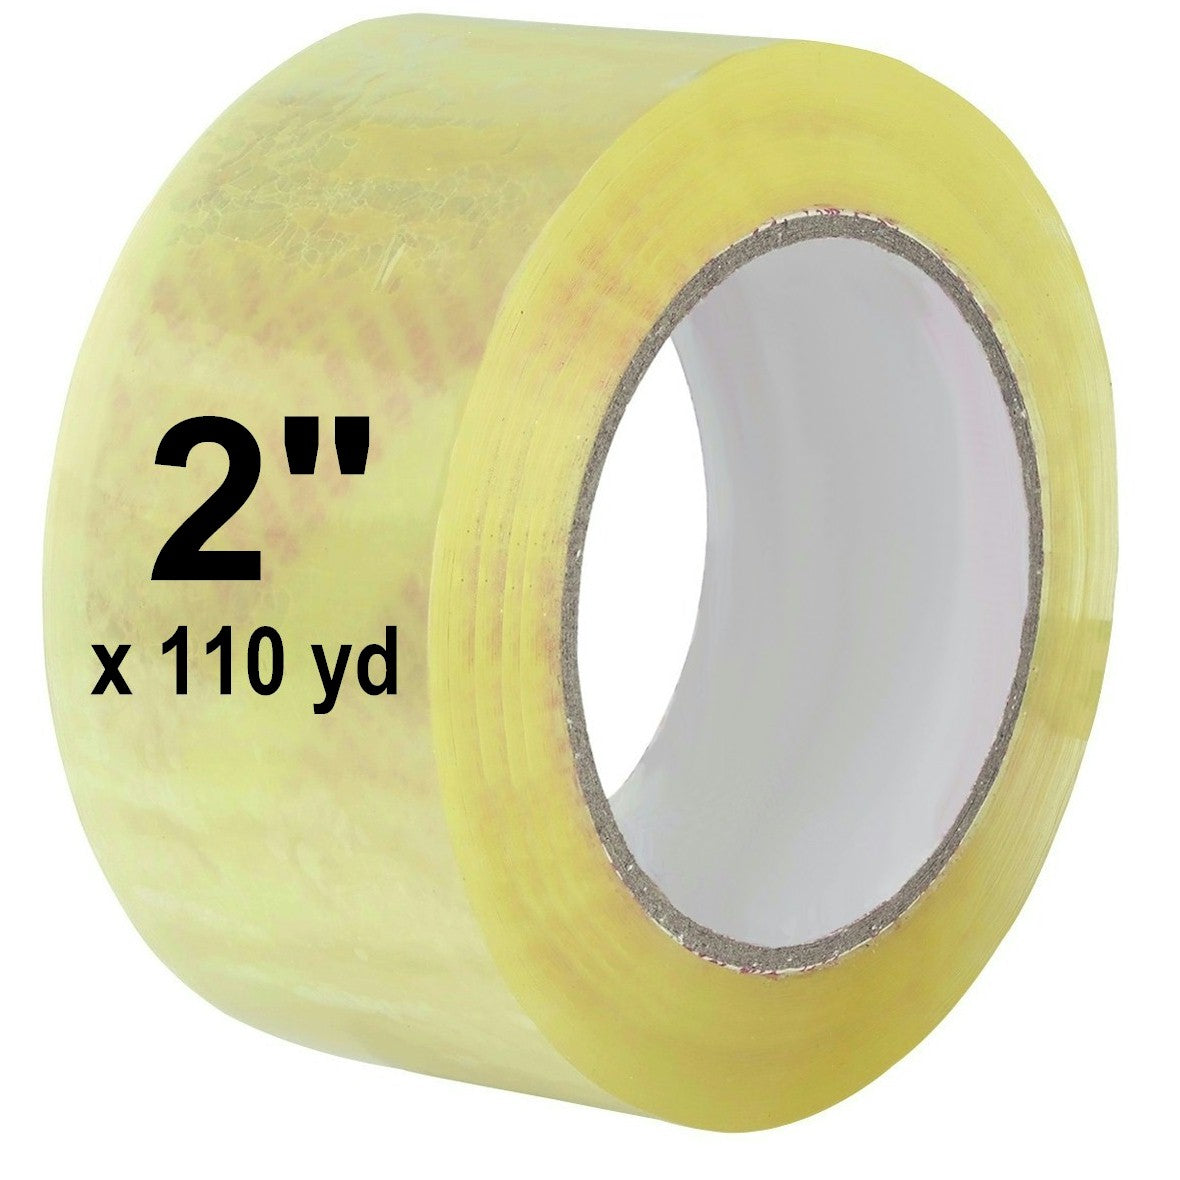 Buy Scotch tape 2 inch from The Stationers